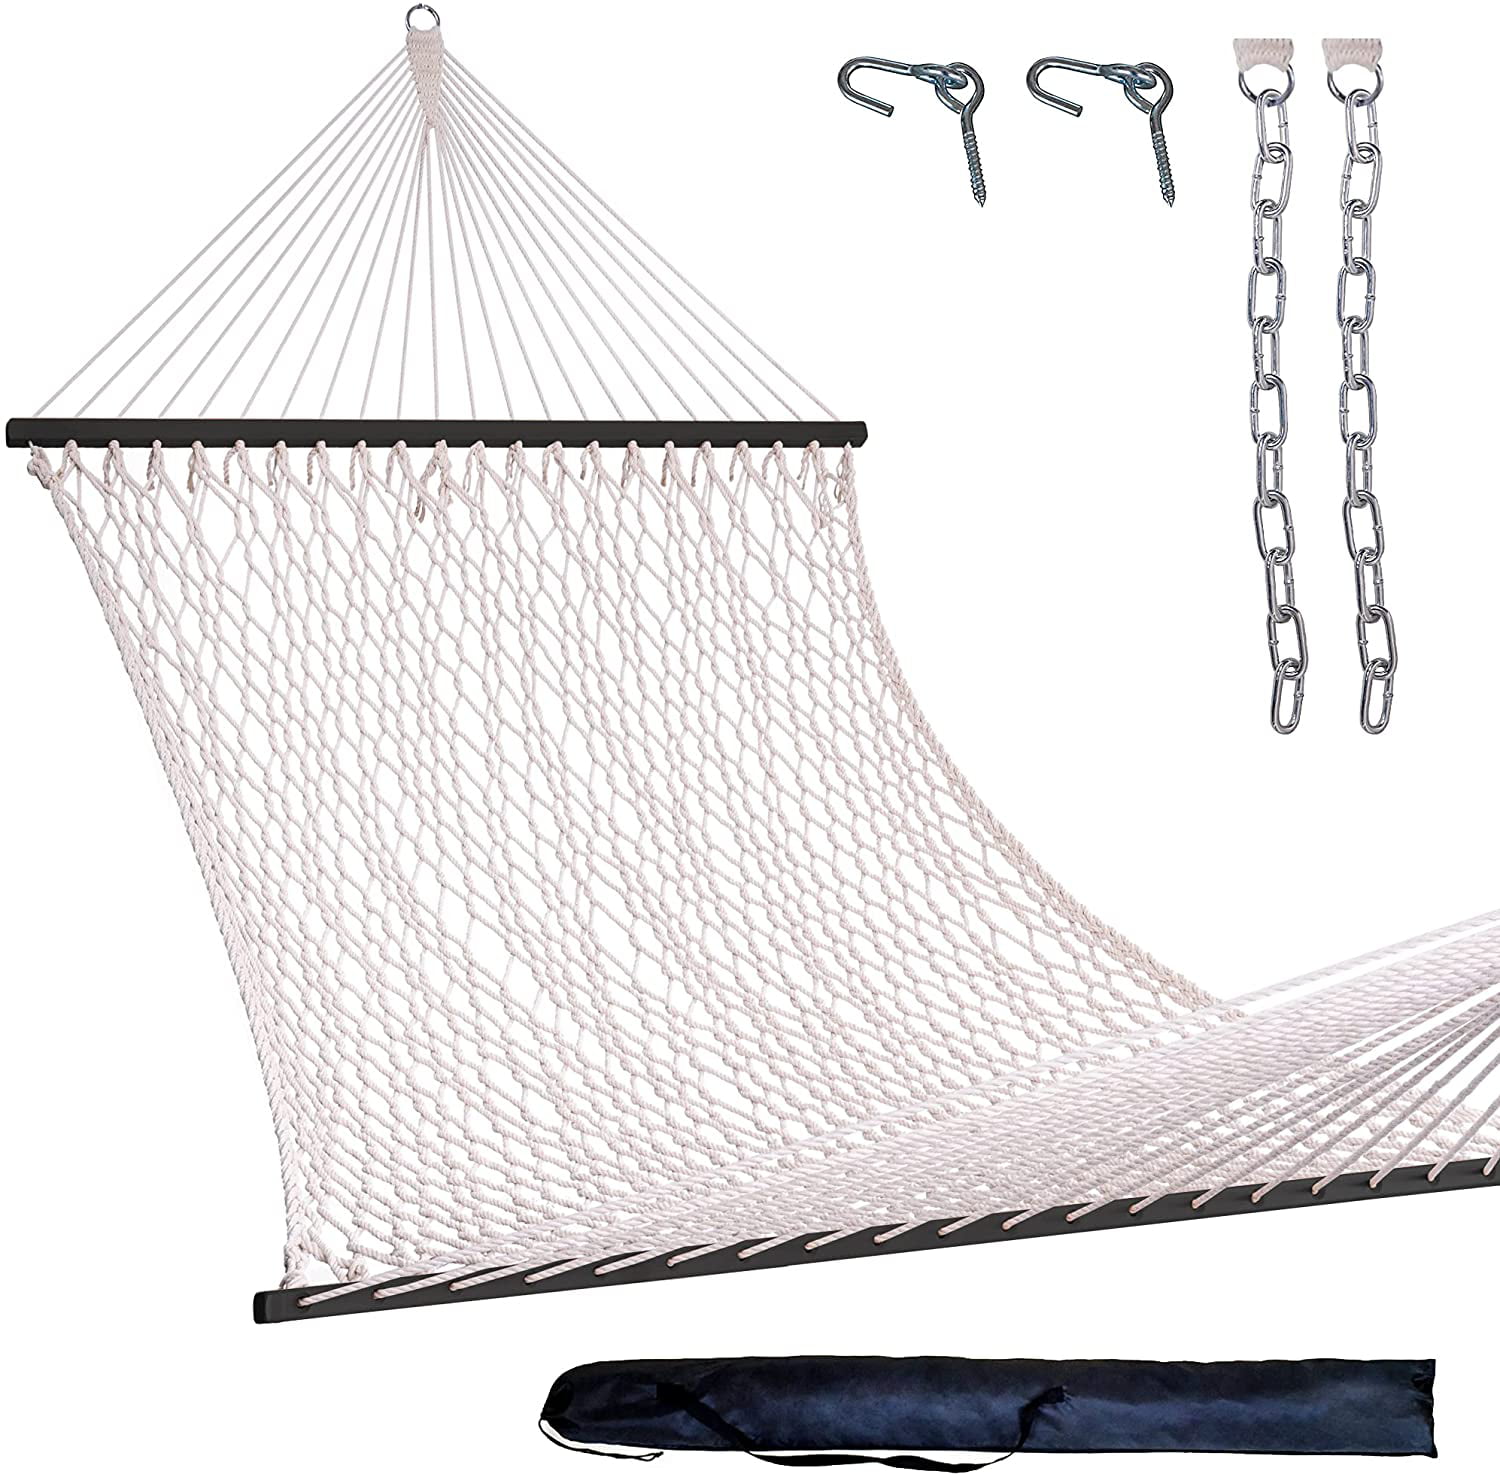 Traditional Hand Woven Cotton Hammock with Spreader Bar Natural & Black Indoor,Poolside for 2 People Max 450 Lbs Lazy Daze 13FT Double Rope Hammocks Carrying Bag and Tree Hooks for Outdoor 